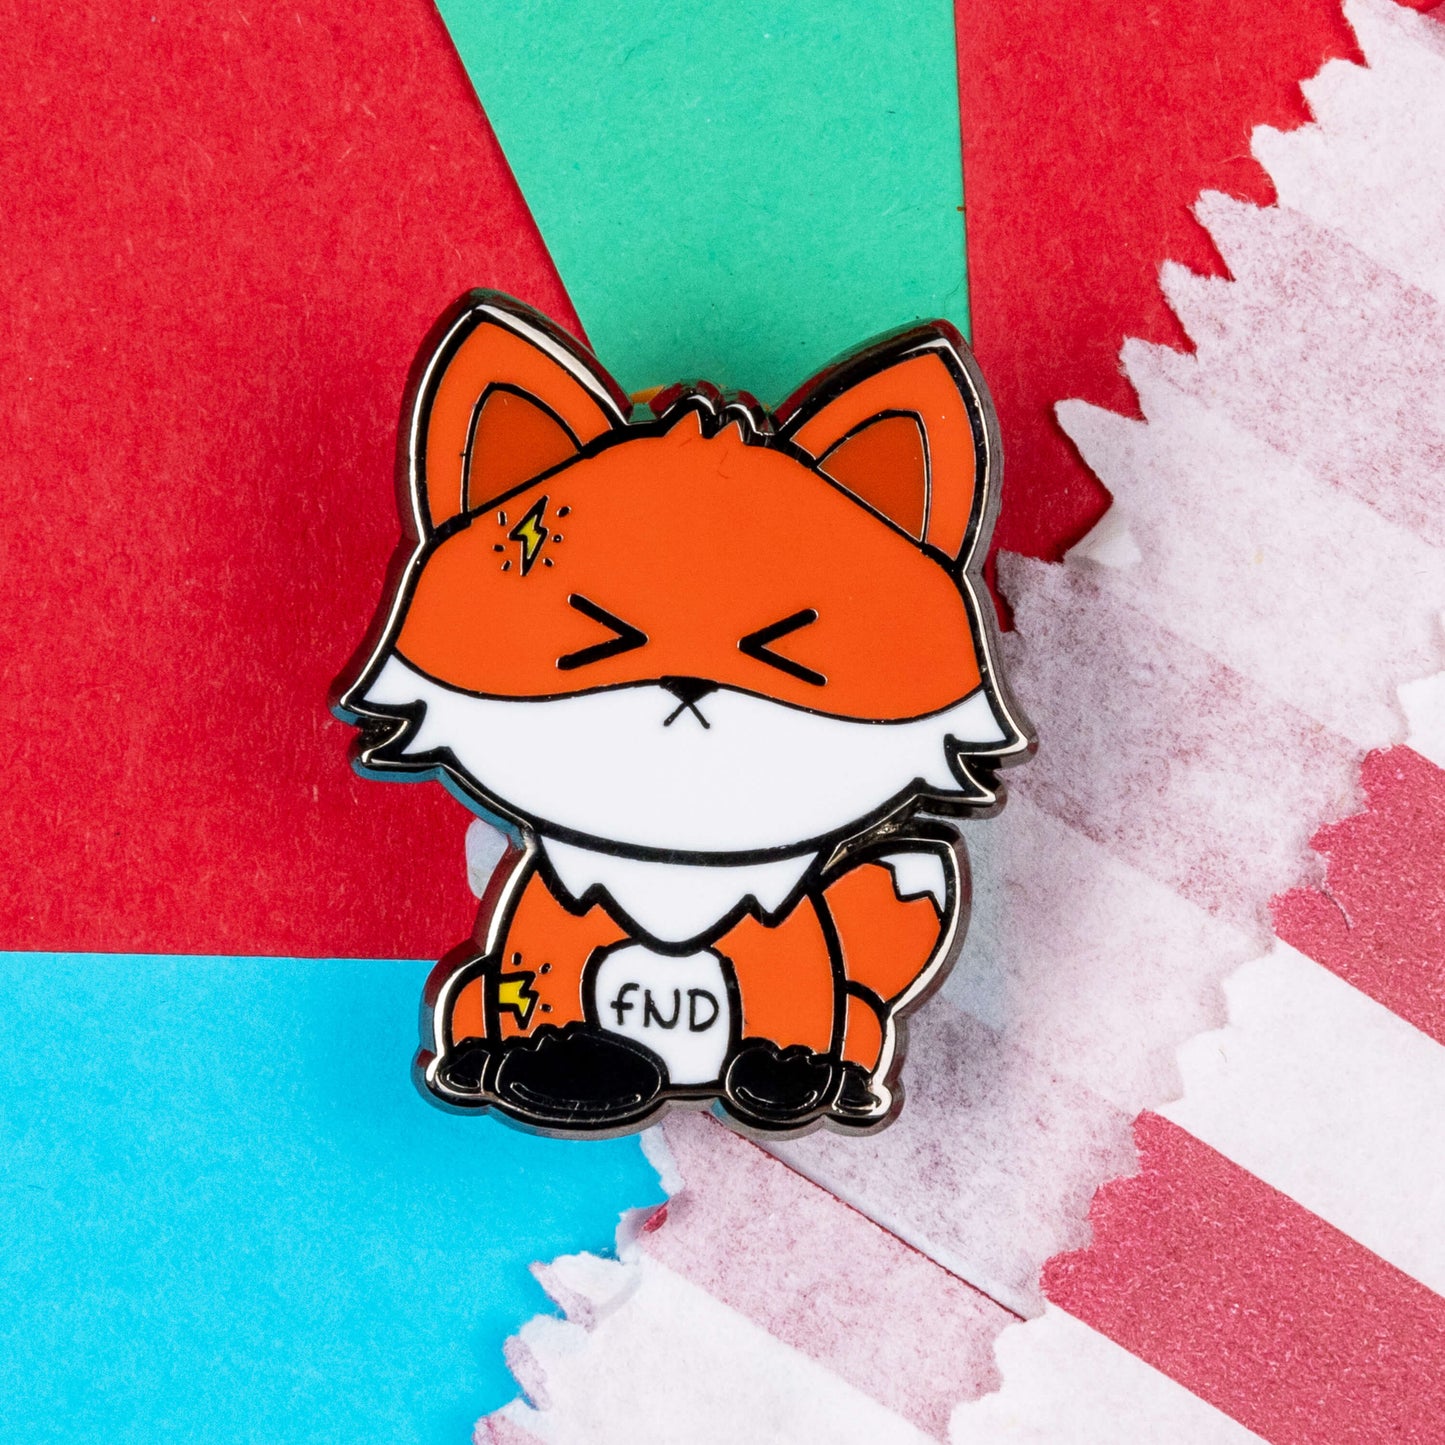 Foxtional Neurological Disorder - Functional Neurological Disorder (FND) Enamel Pin shown on a blue, red and teal background next to a red and white striped paper bag. The enamel pin is a fox with a pained expression on its face and yellow lightning illustration on its head and arm. The enamel pin is designed to raise awareness for Functional Neurological Disorder (FND)